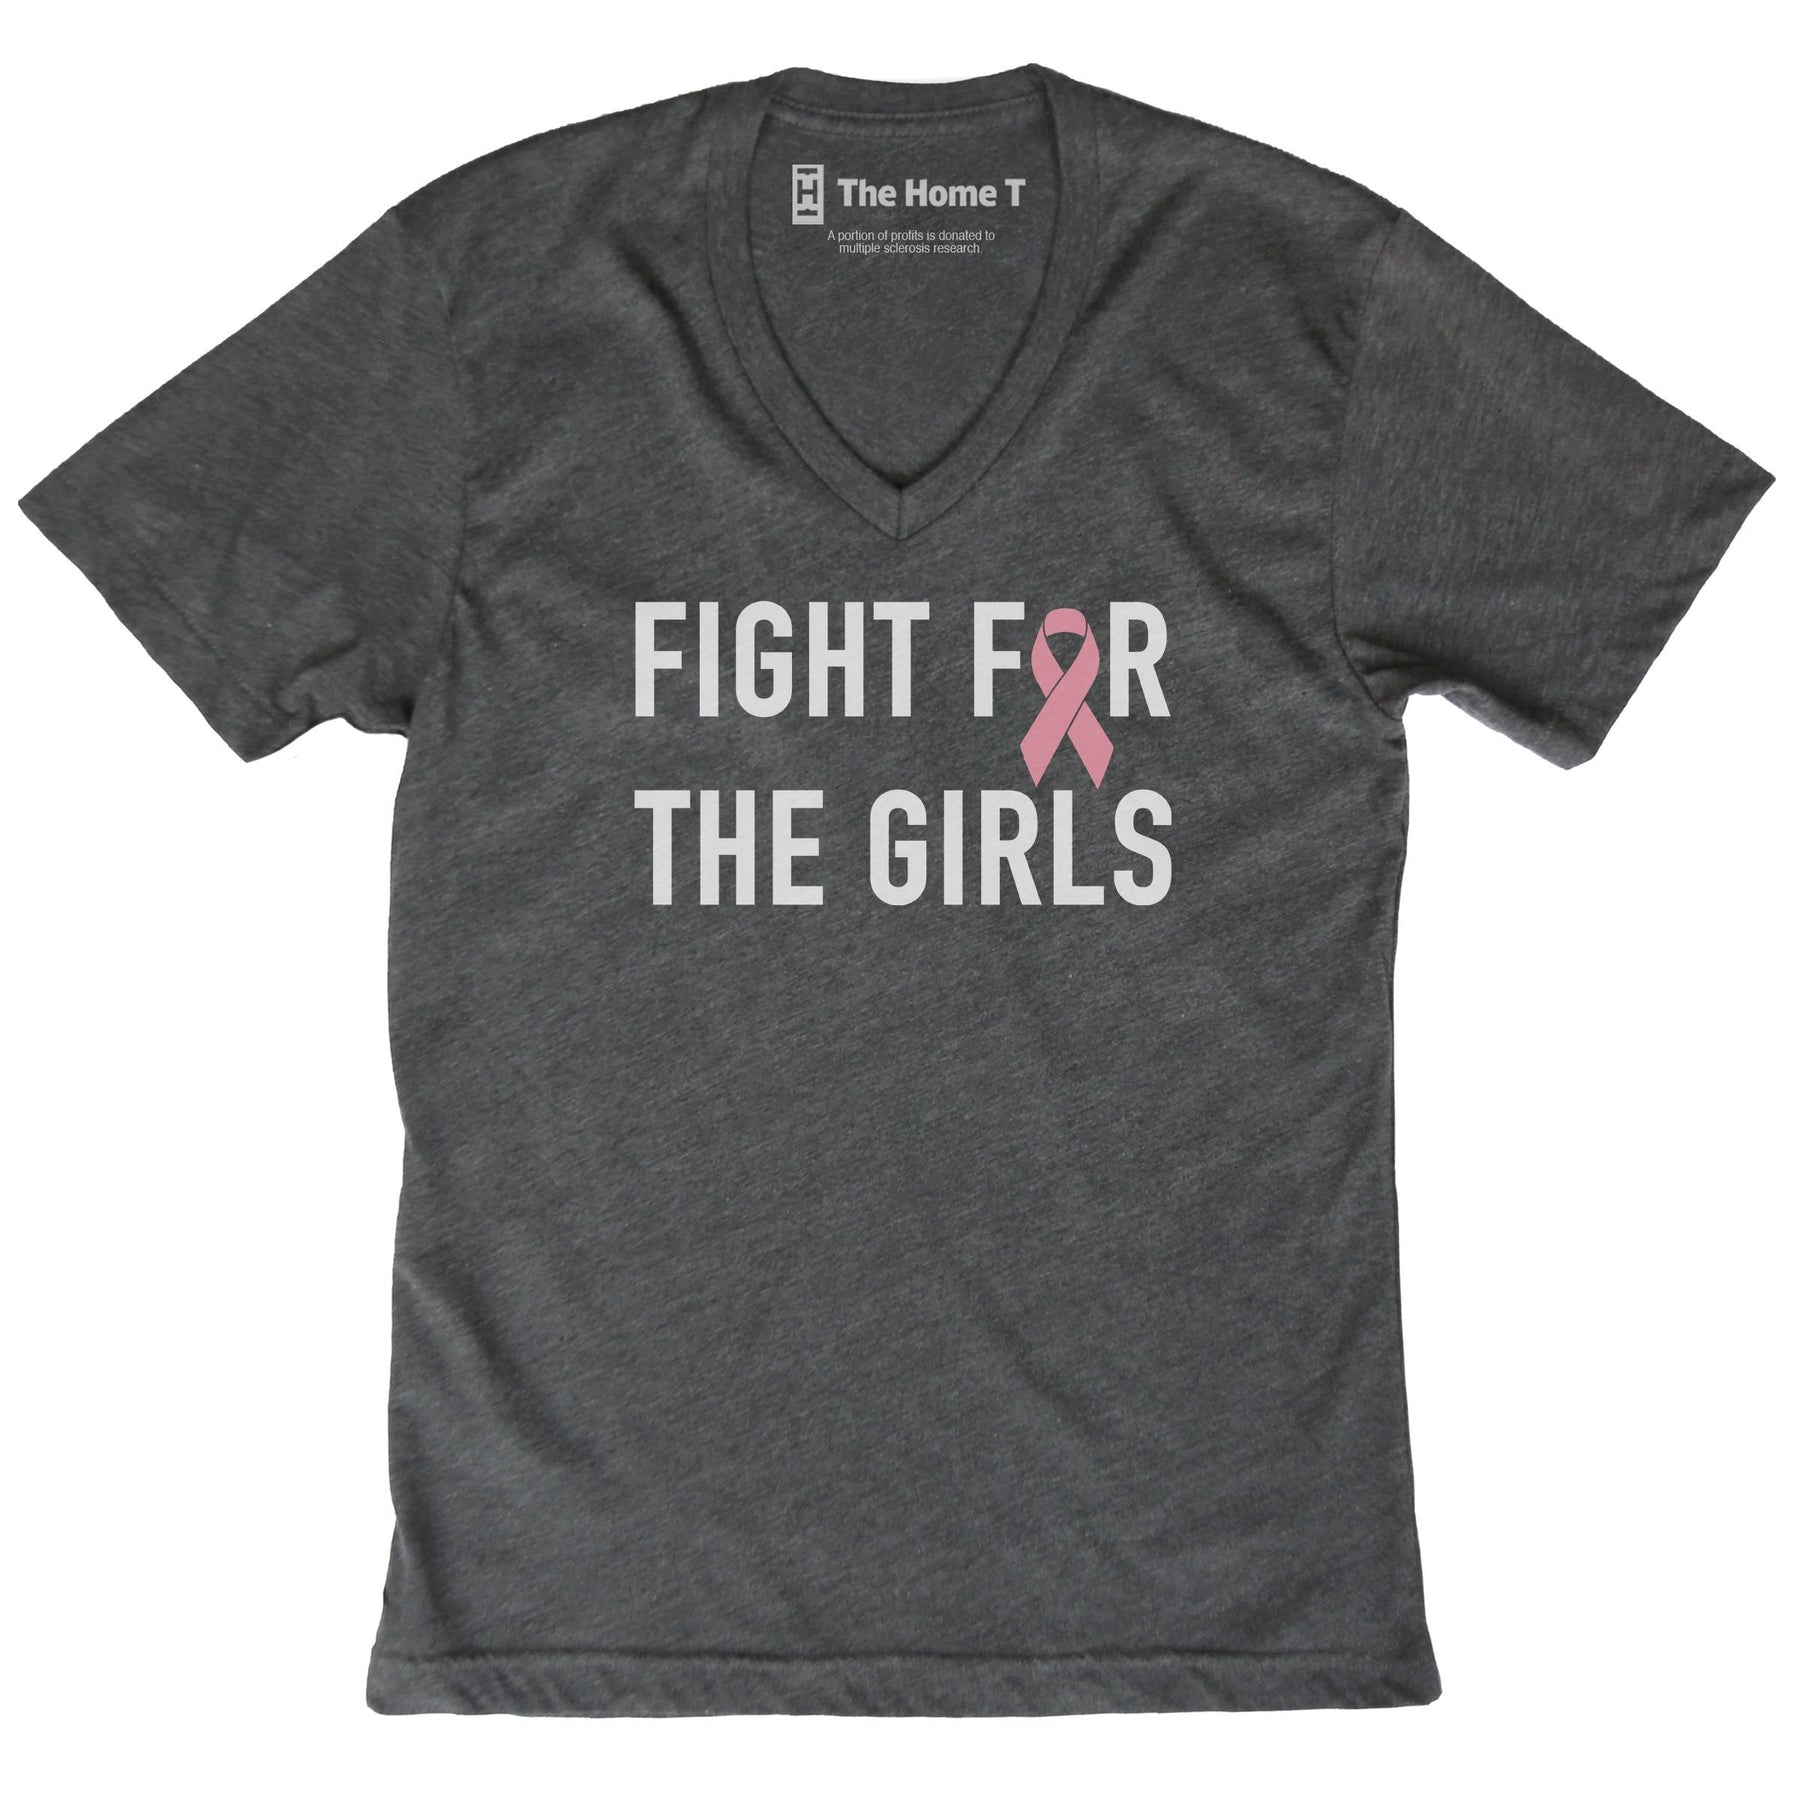 Breast Cancer Awareness Fight For the Girls The Home T